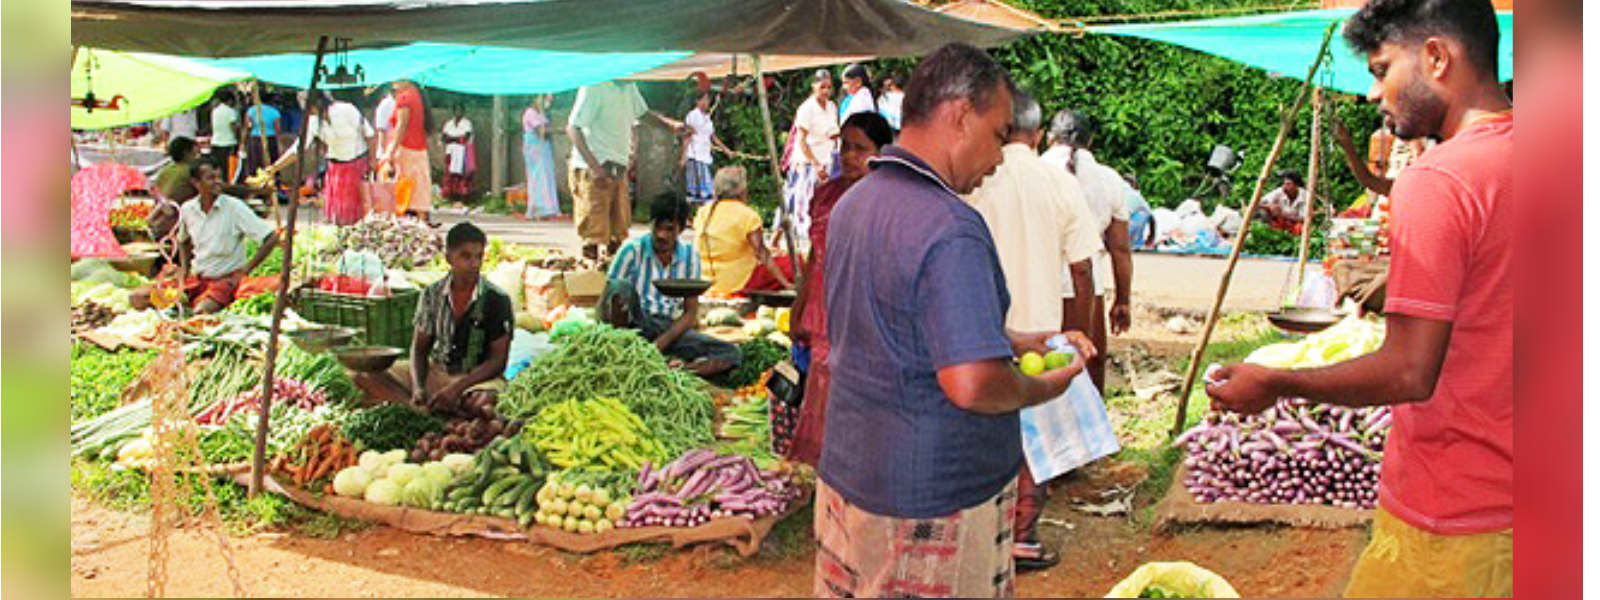 A hike in vegetable prices